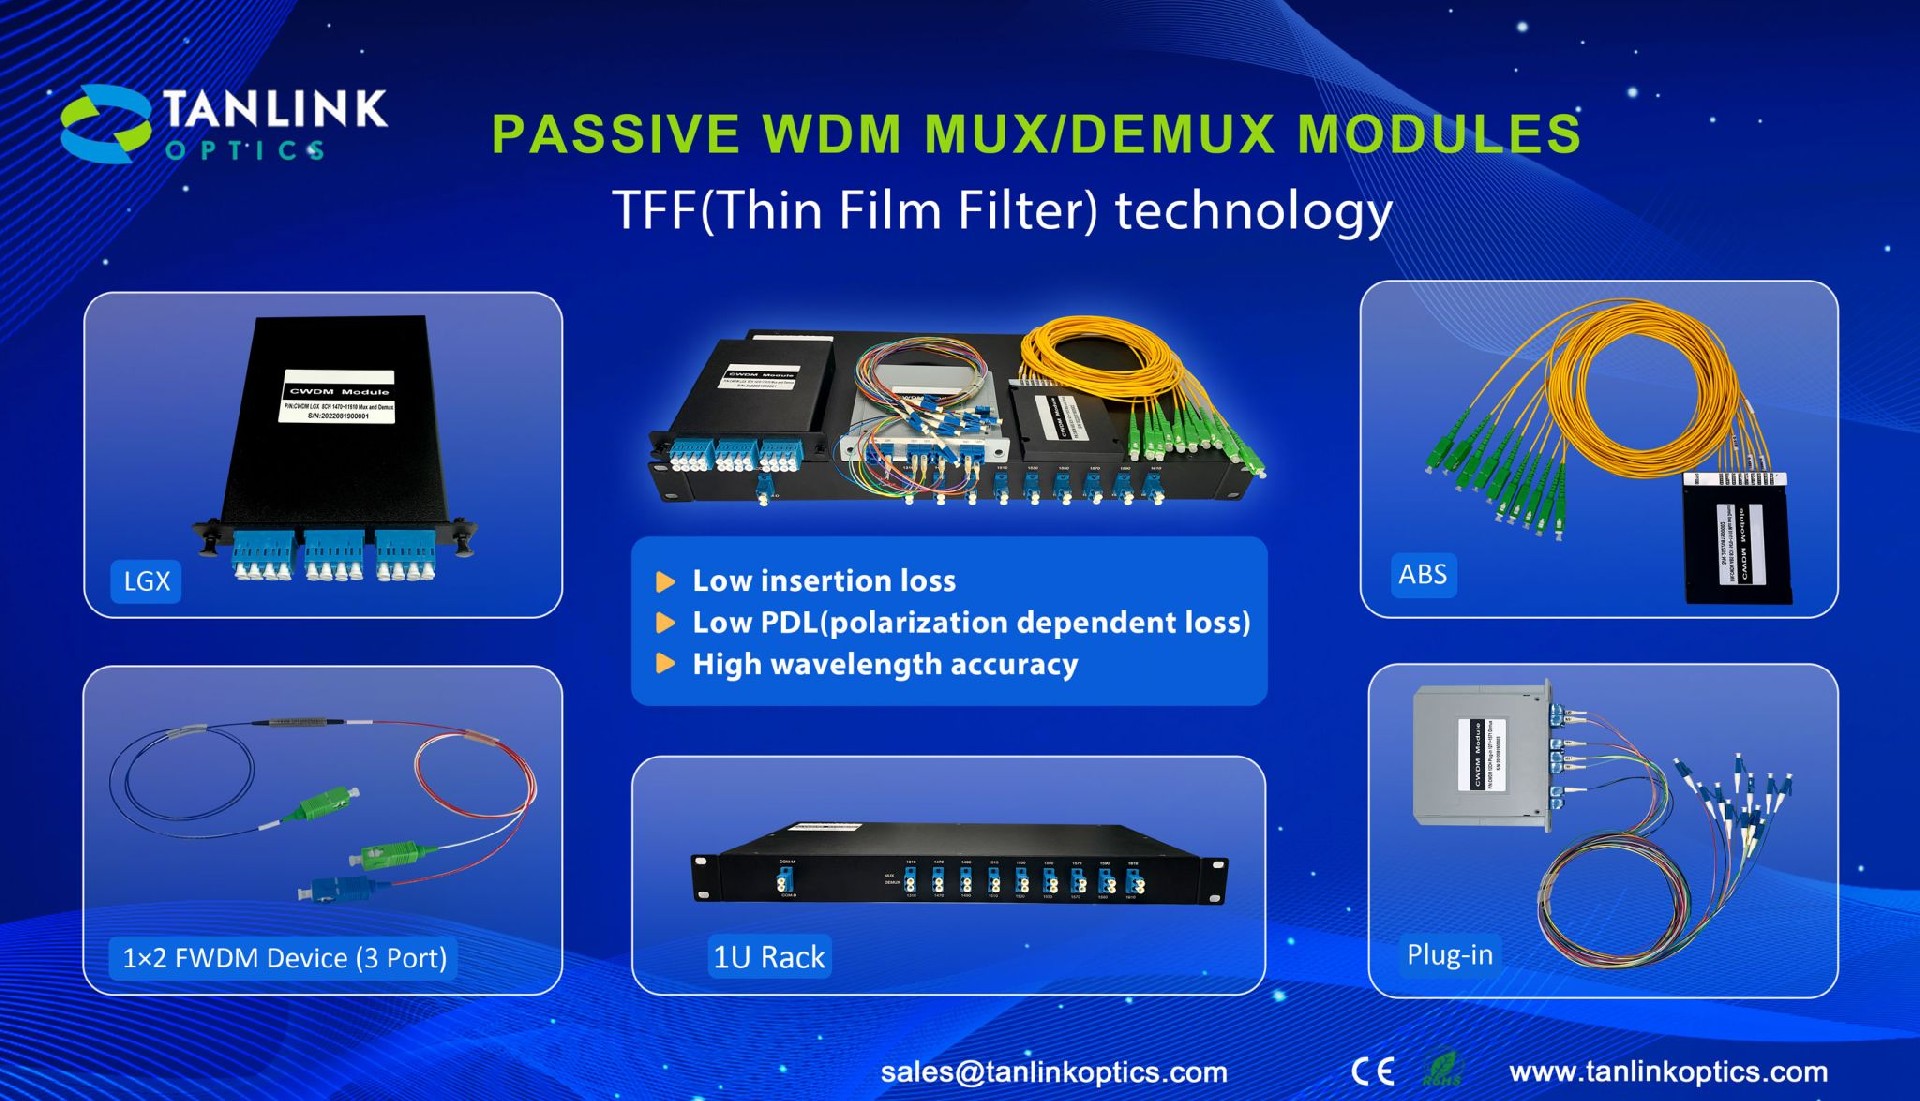 Tanlink has Launched Mux/Demux Modules Based on Thin Film Filter (TFF) Technology